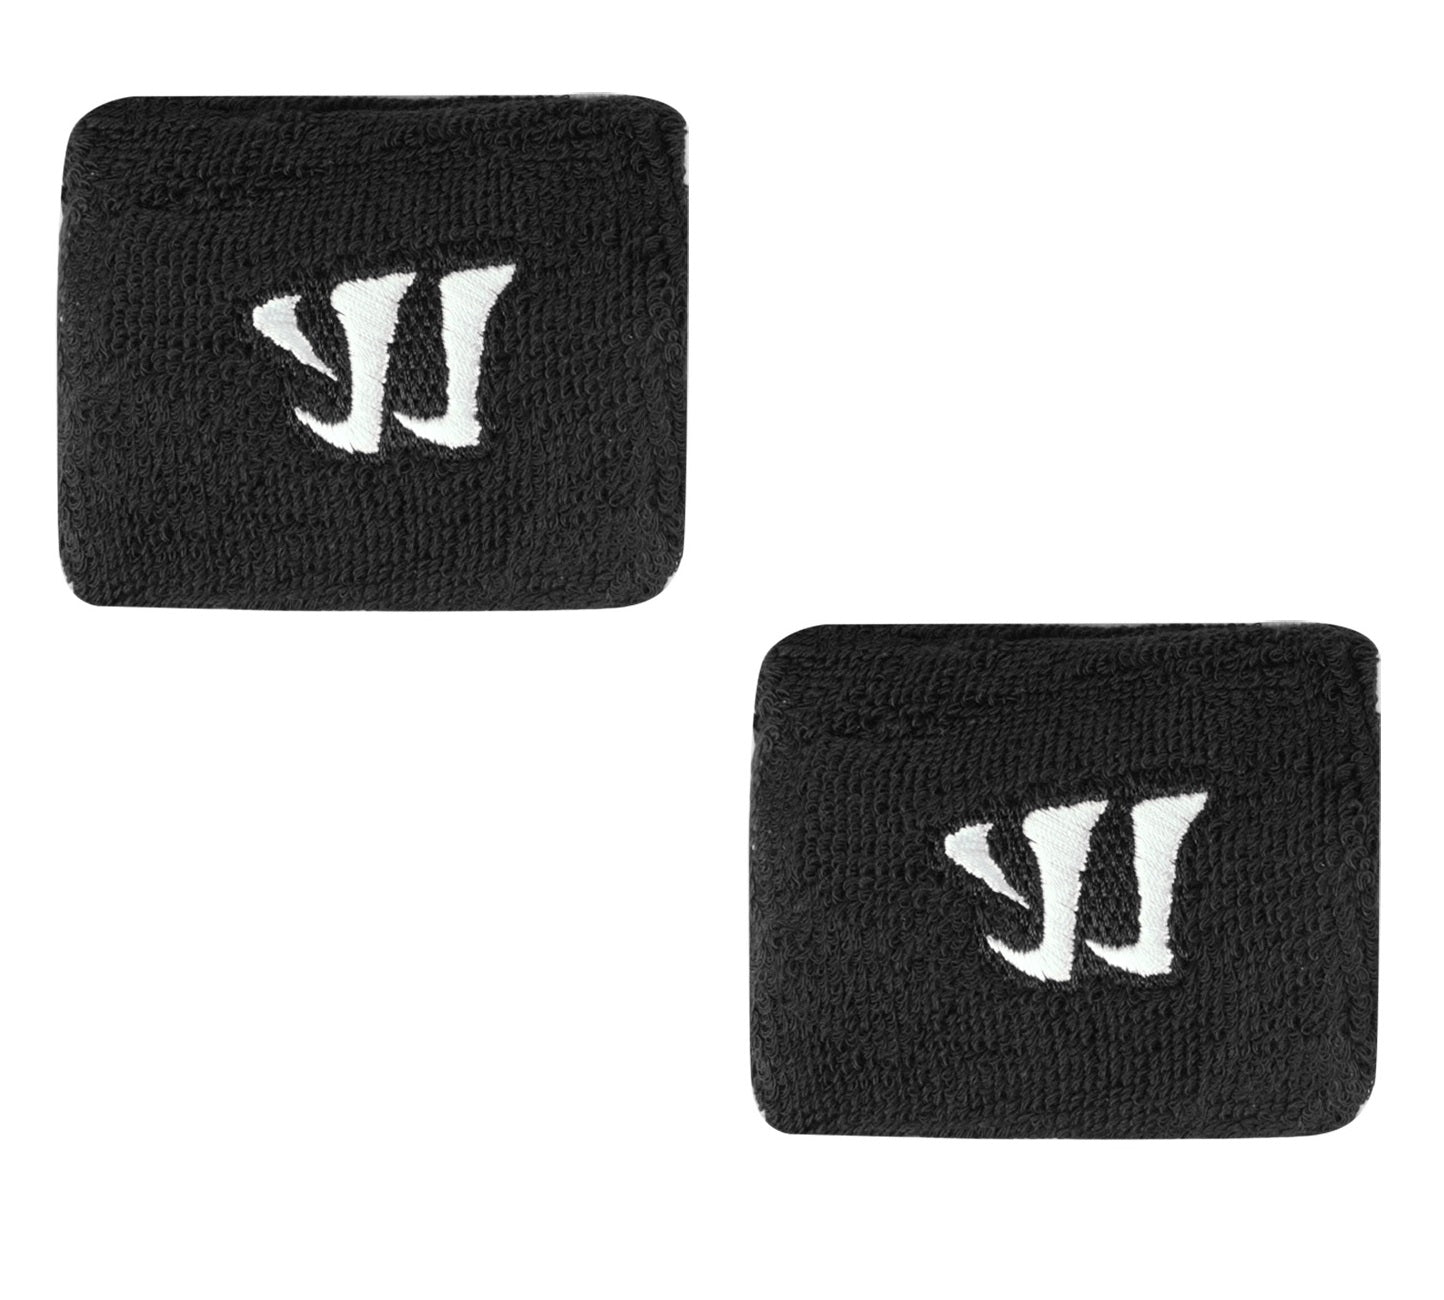 Warrior Hockey Wrist Guards with Plastic Inserts